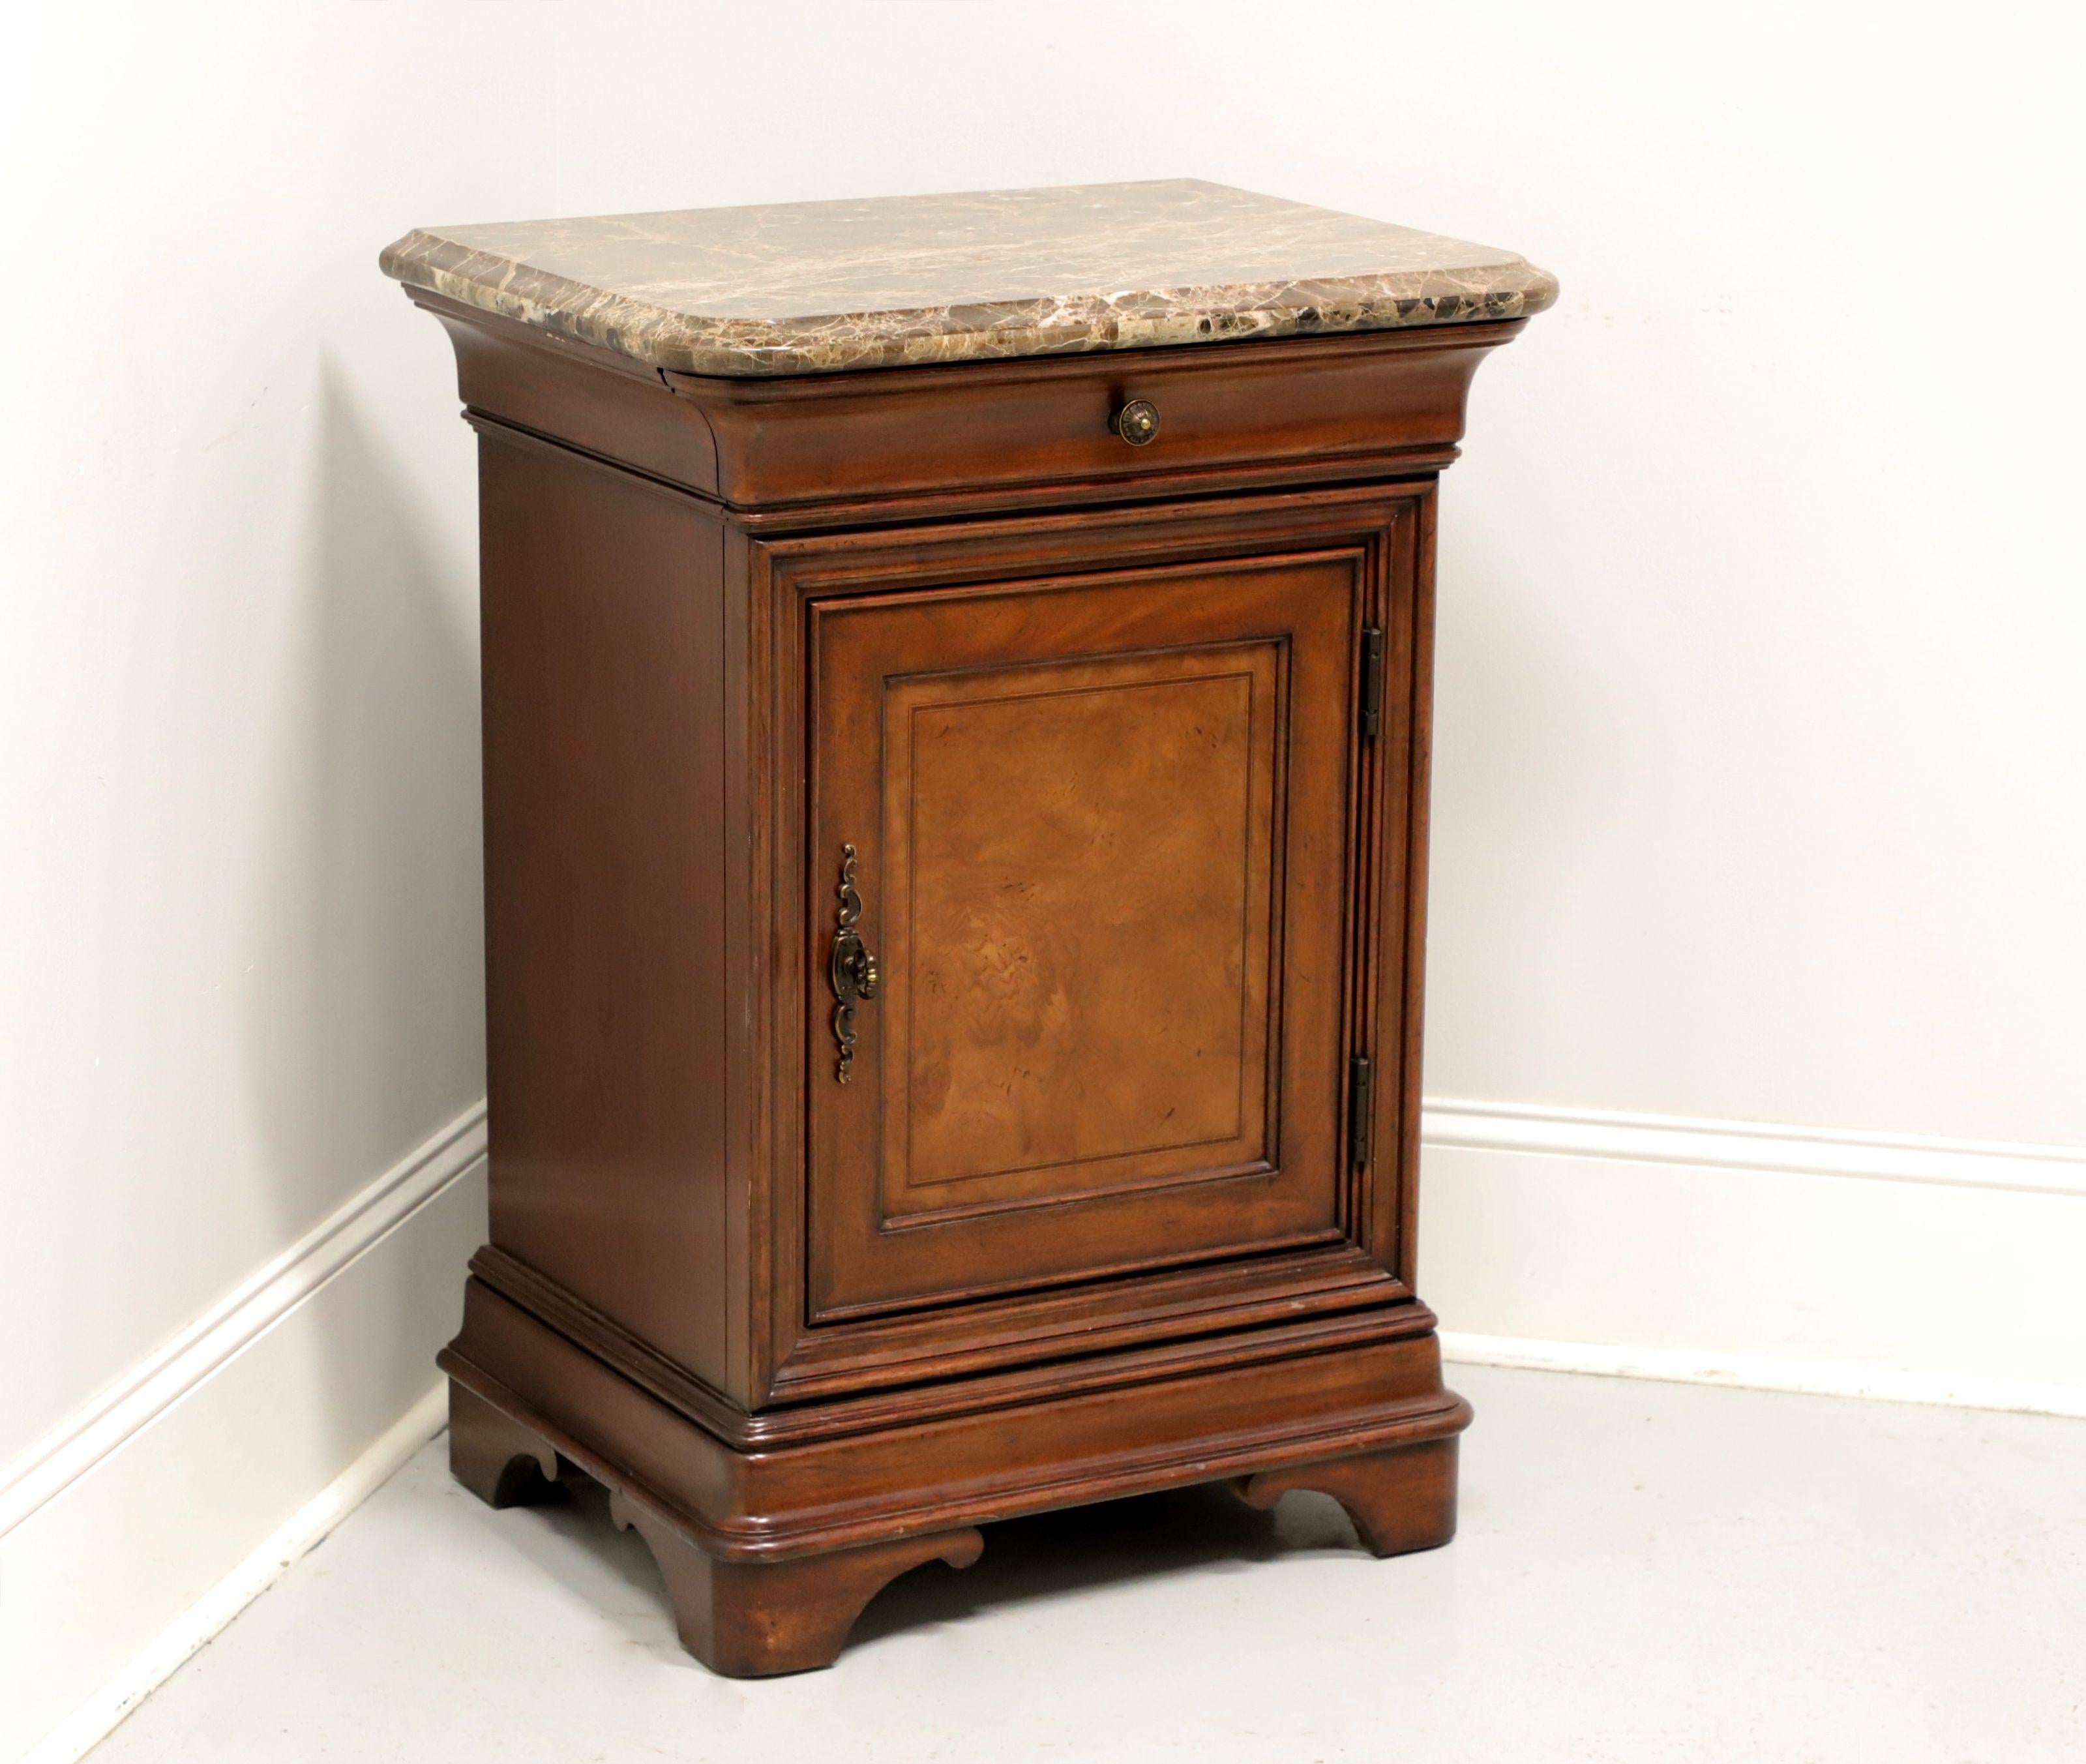 THOMASVILLE Inlaid Burl Elm Transitional Cultured Marble Top Bedside Cabinet 5